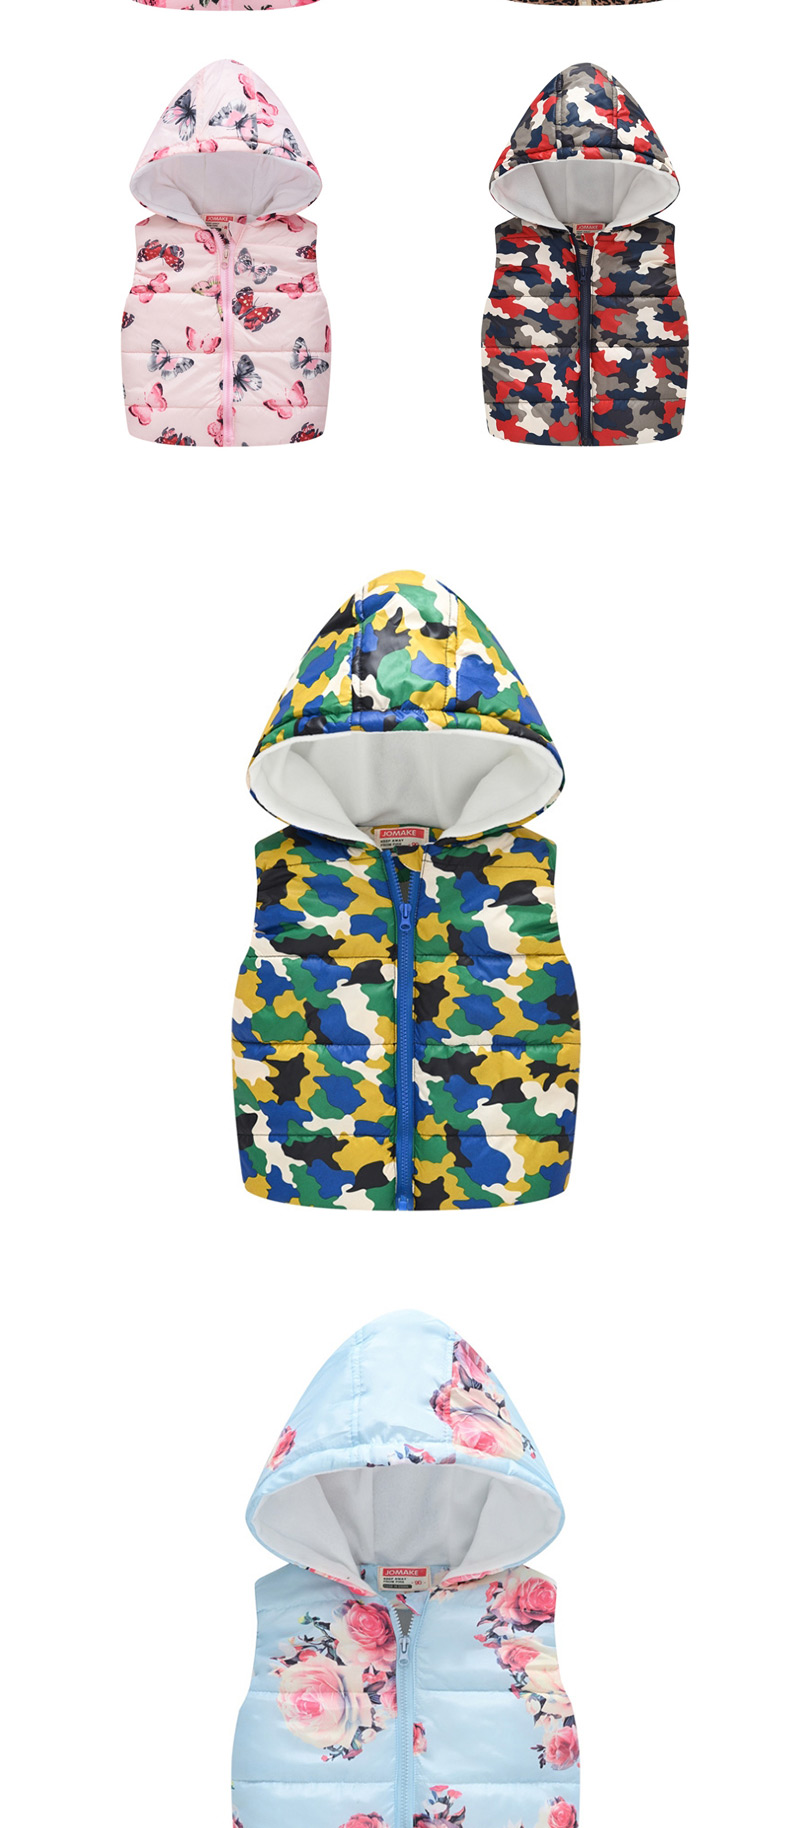 Fashion Red Camouflage Cartoon Hooded Zipper Child Cotton Vest,Kids Clothing